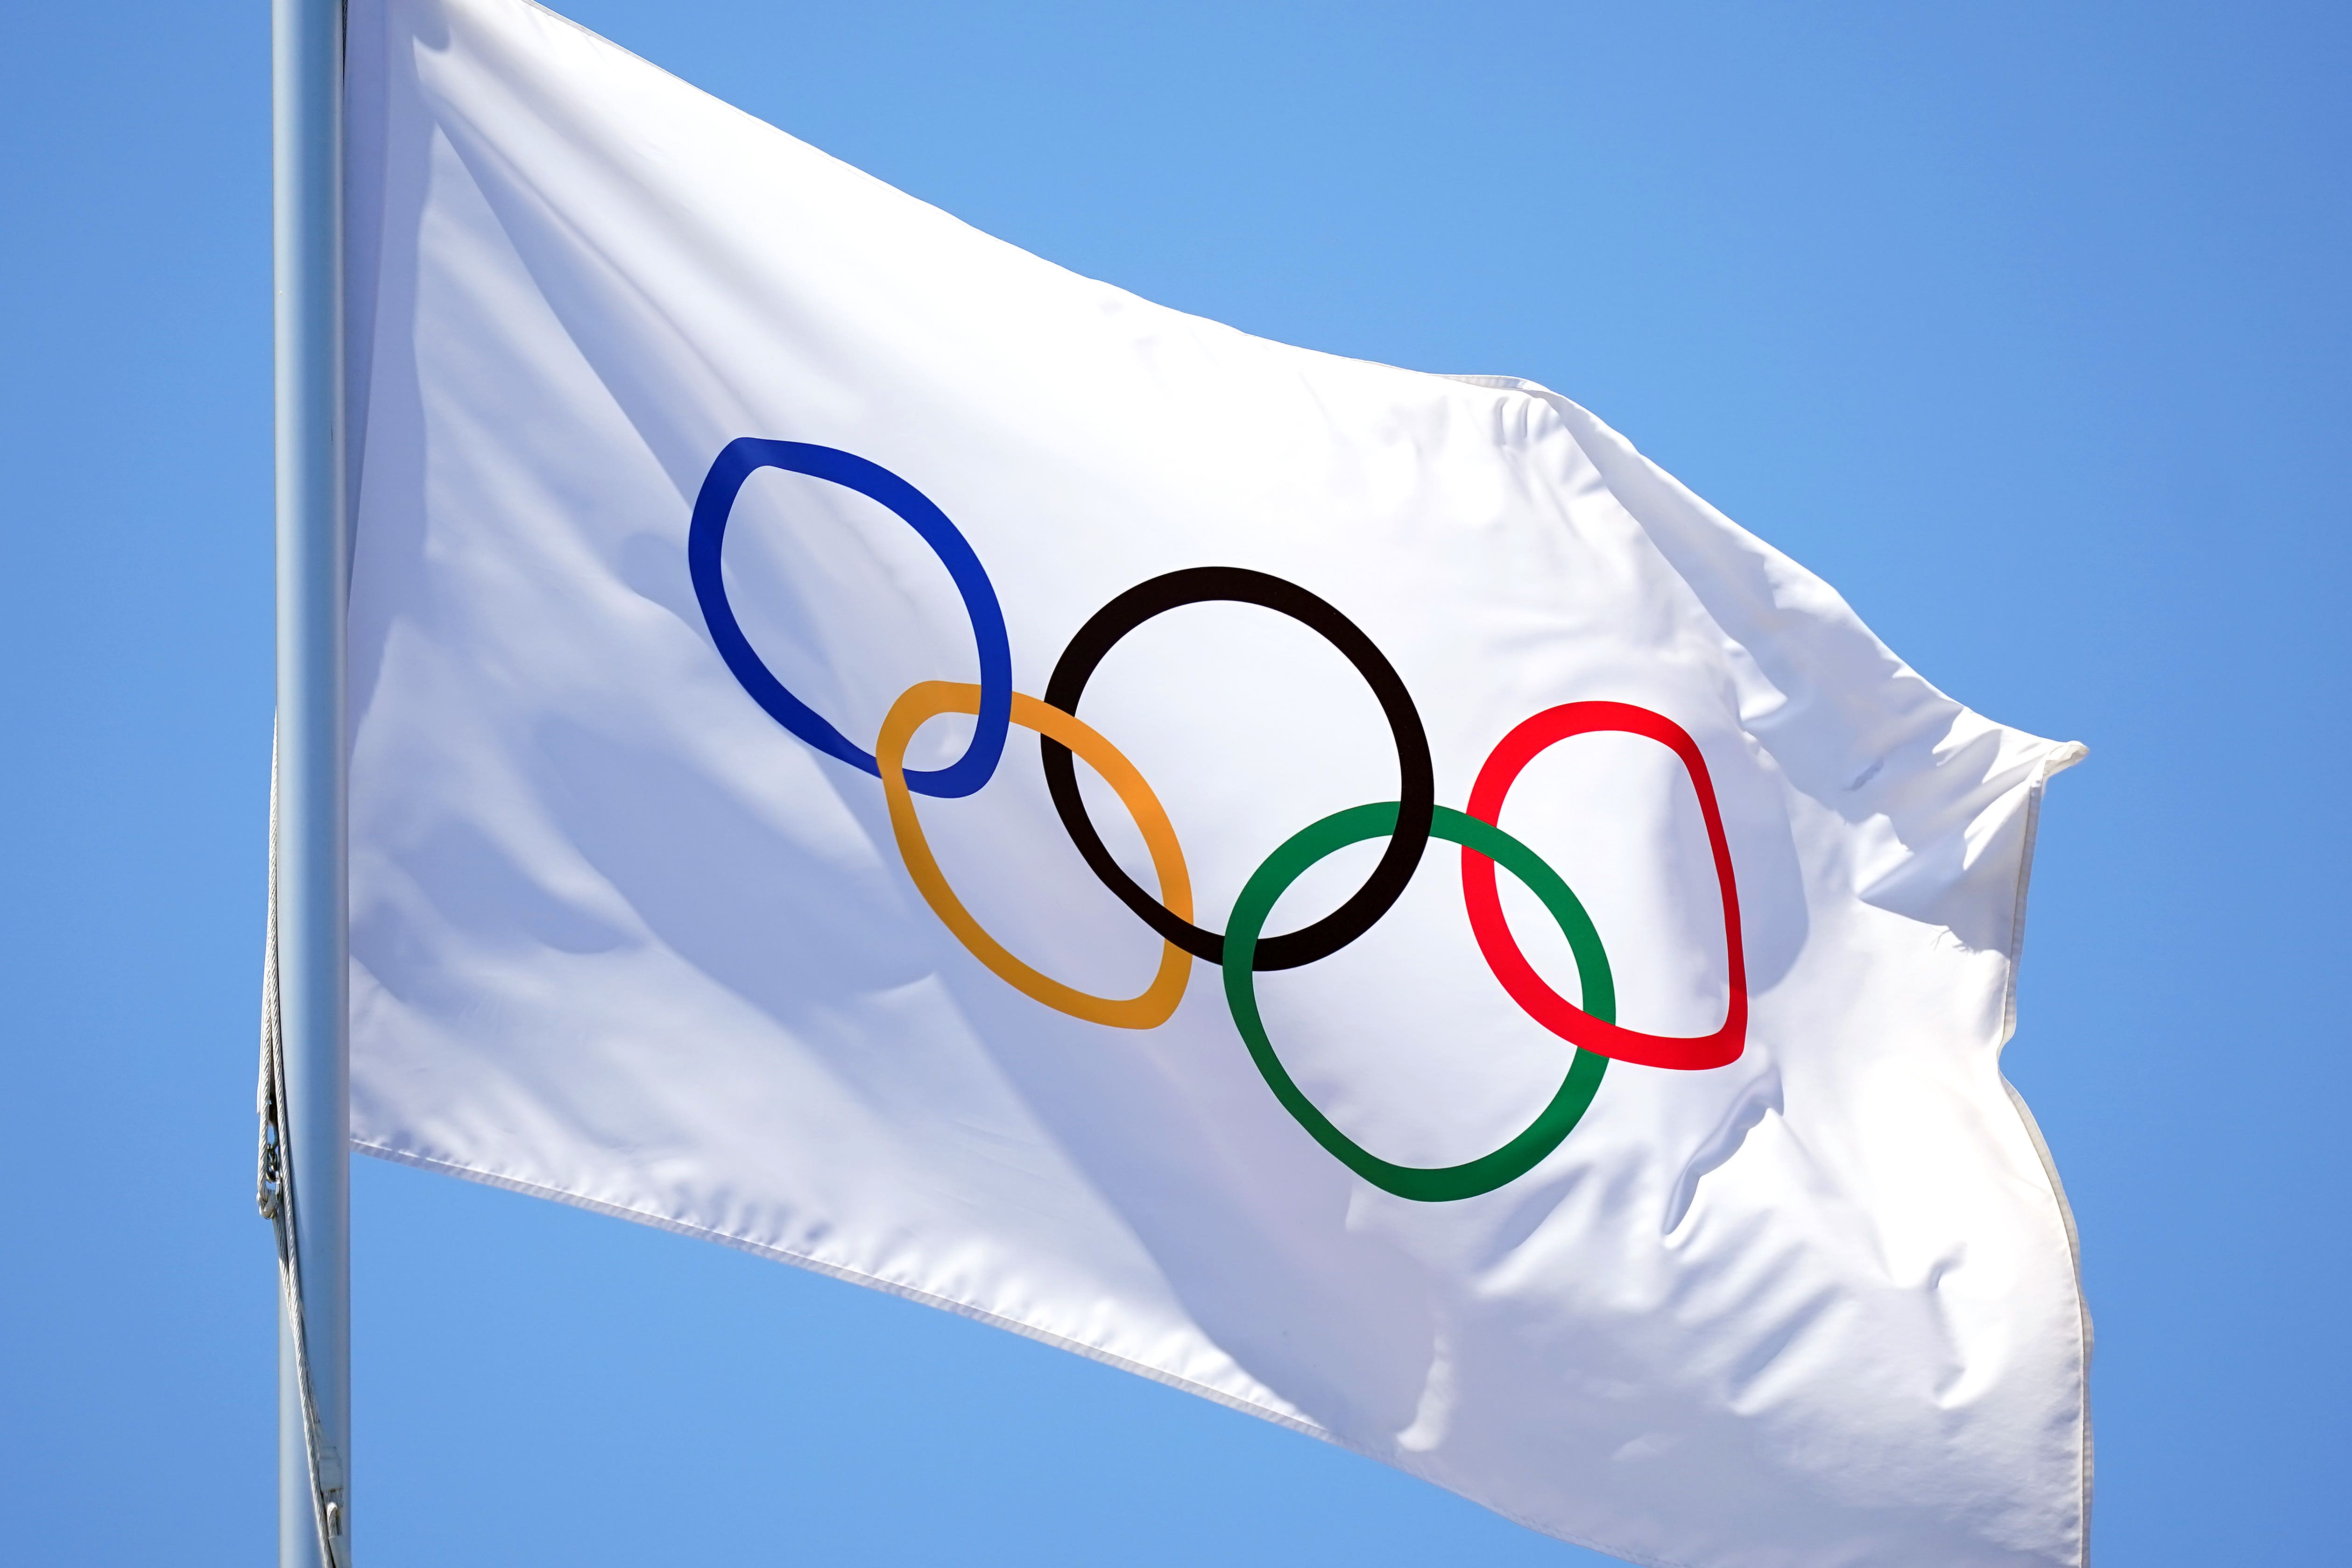 Russiana nd Belarusian athletes have been banned from the opening ceremony of Paris 2024